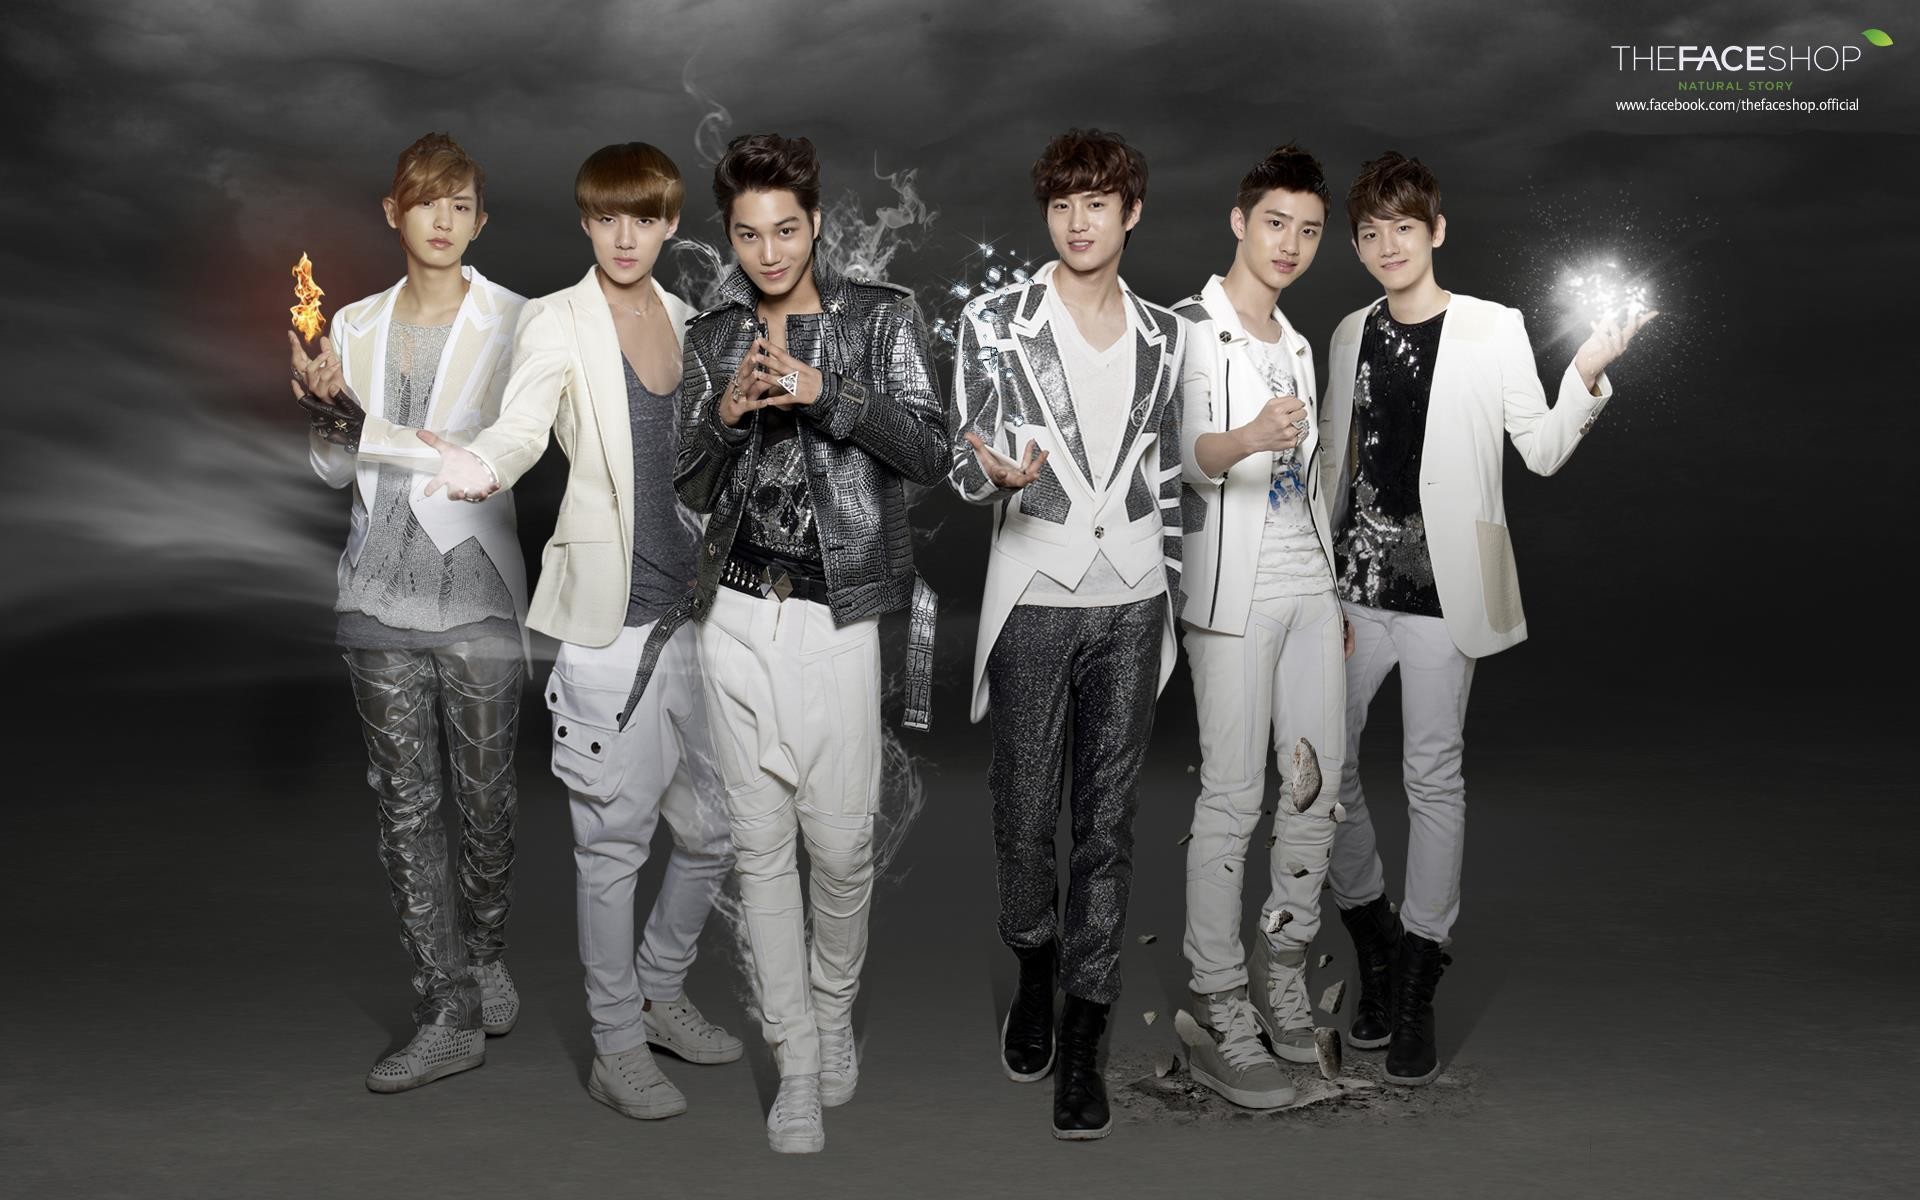 1920x1200 Download Exo For The Face Shop Kpop Wallpaper | Full HD Wallpapers